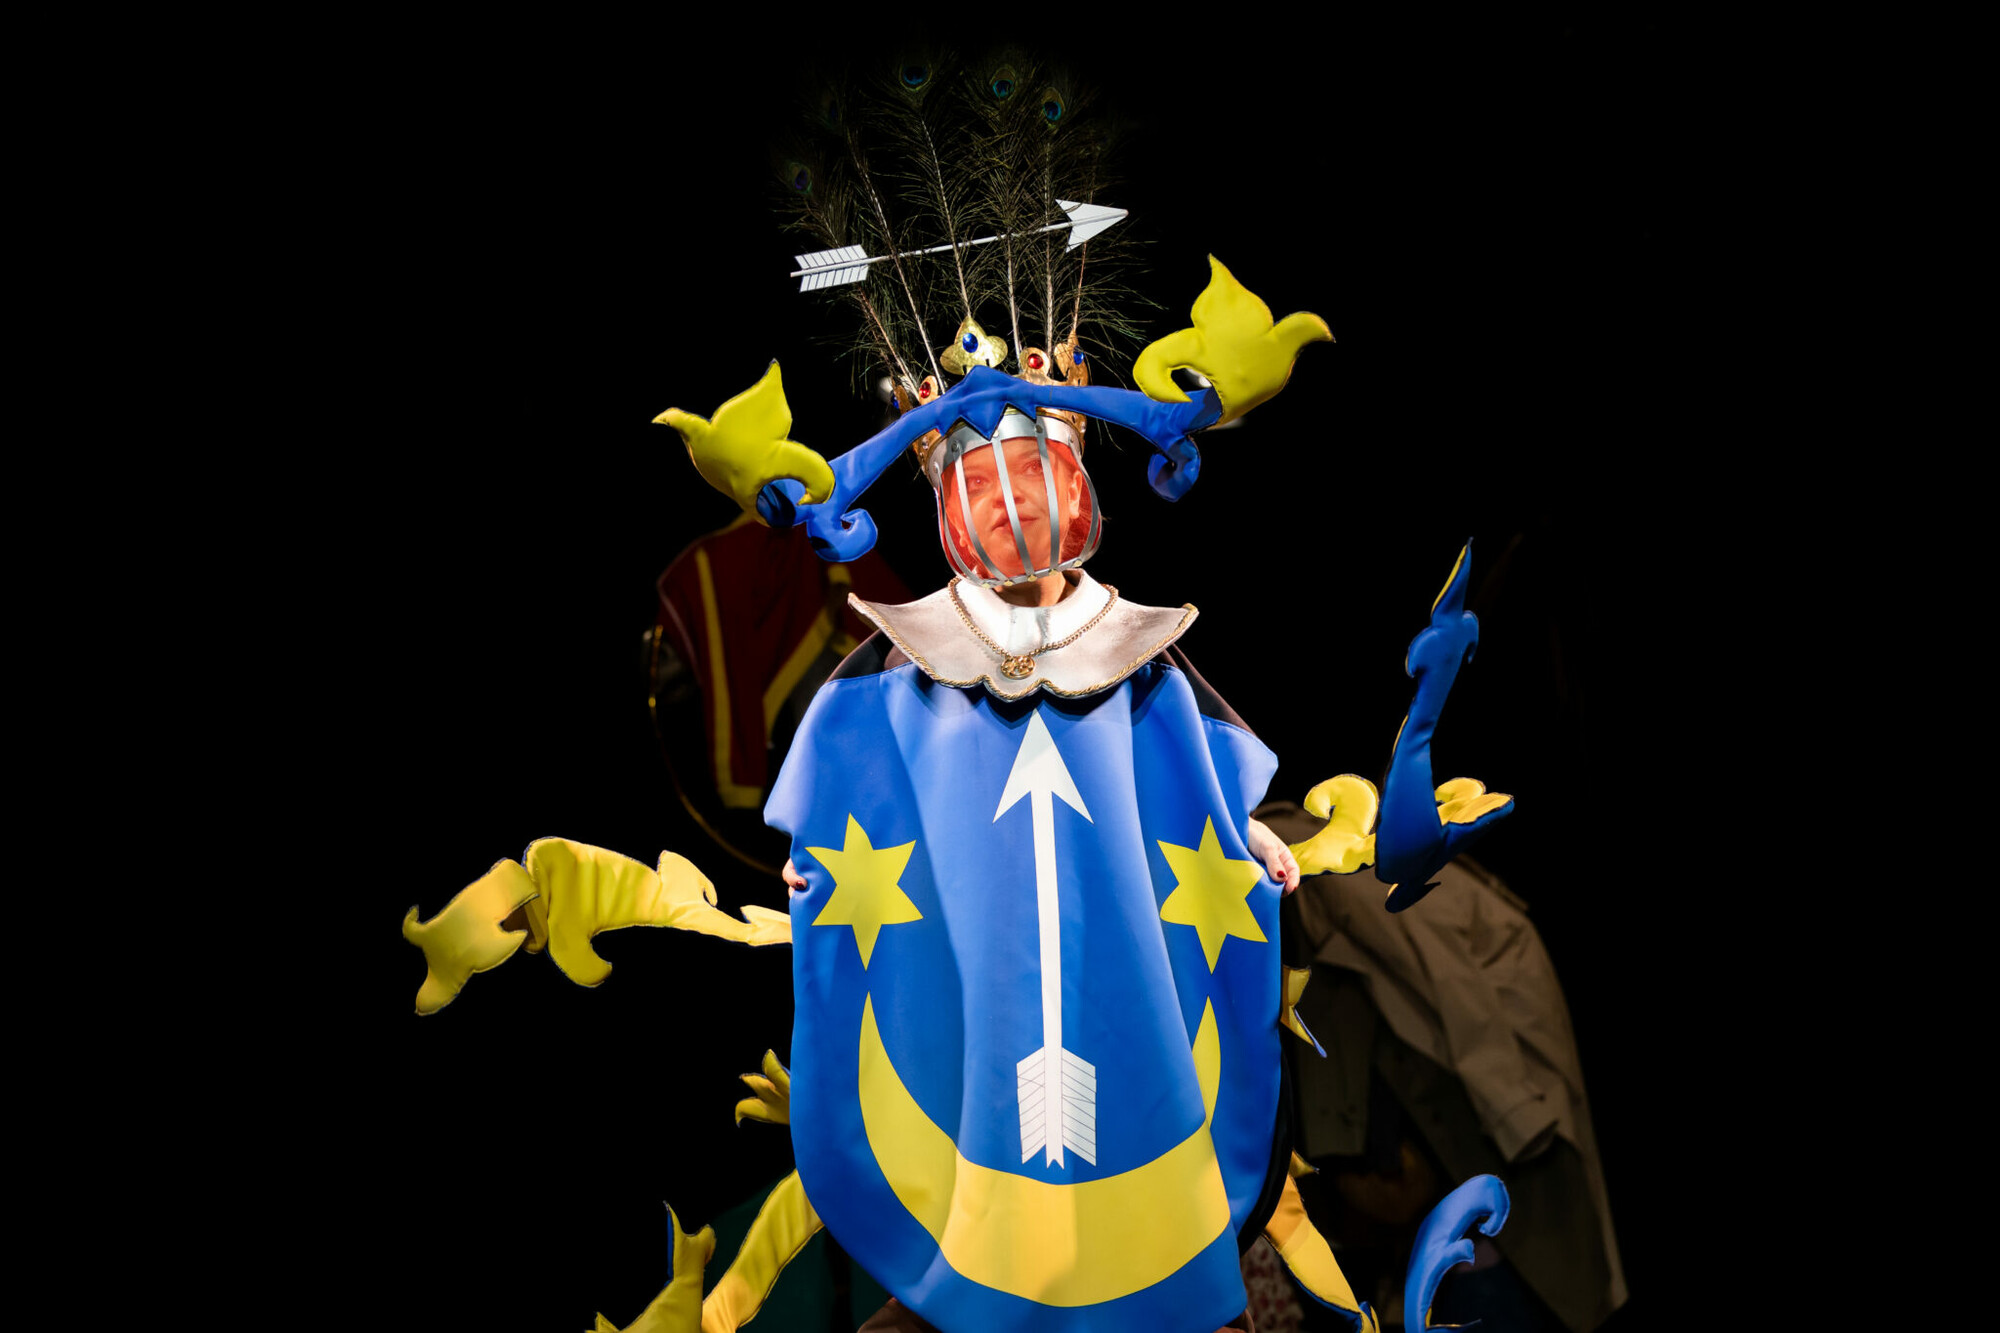 An actor in a bright blue and yellow costume.